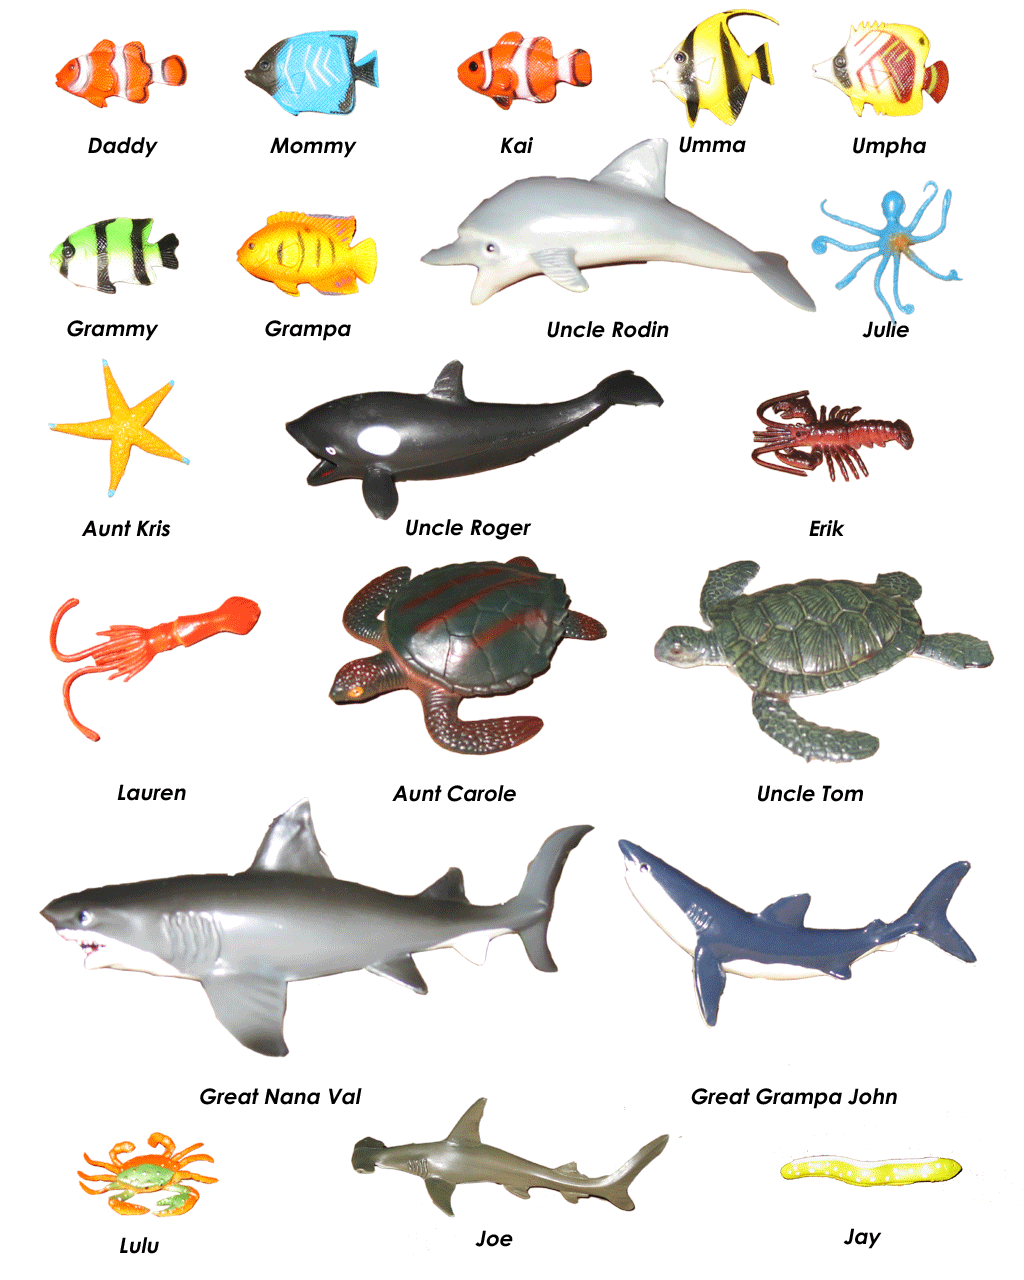 aquatic animals live in water - Clip Art Library